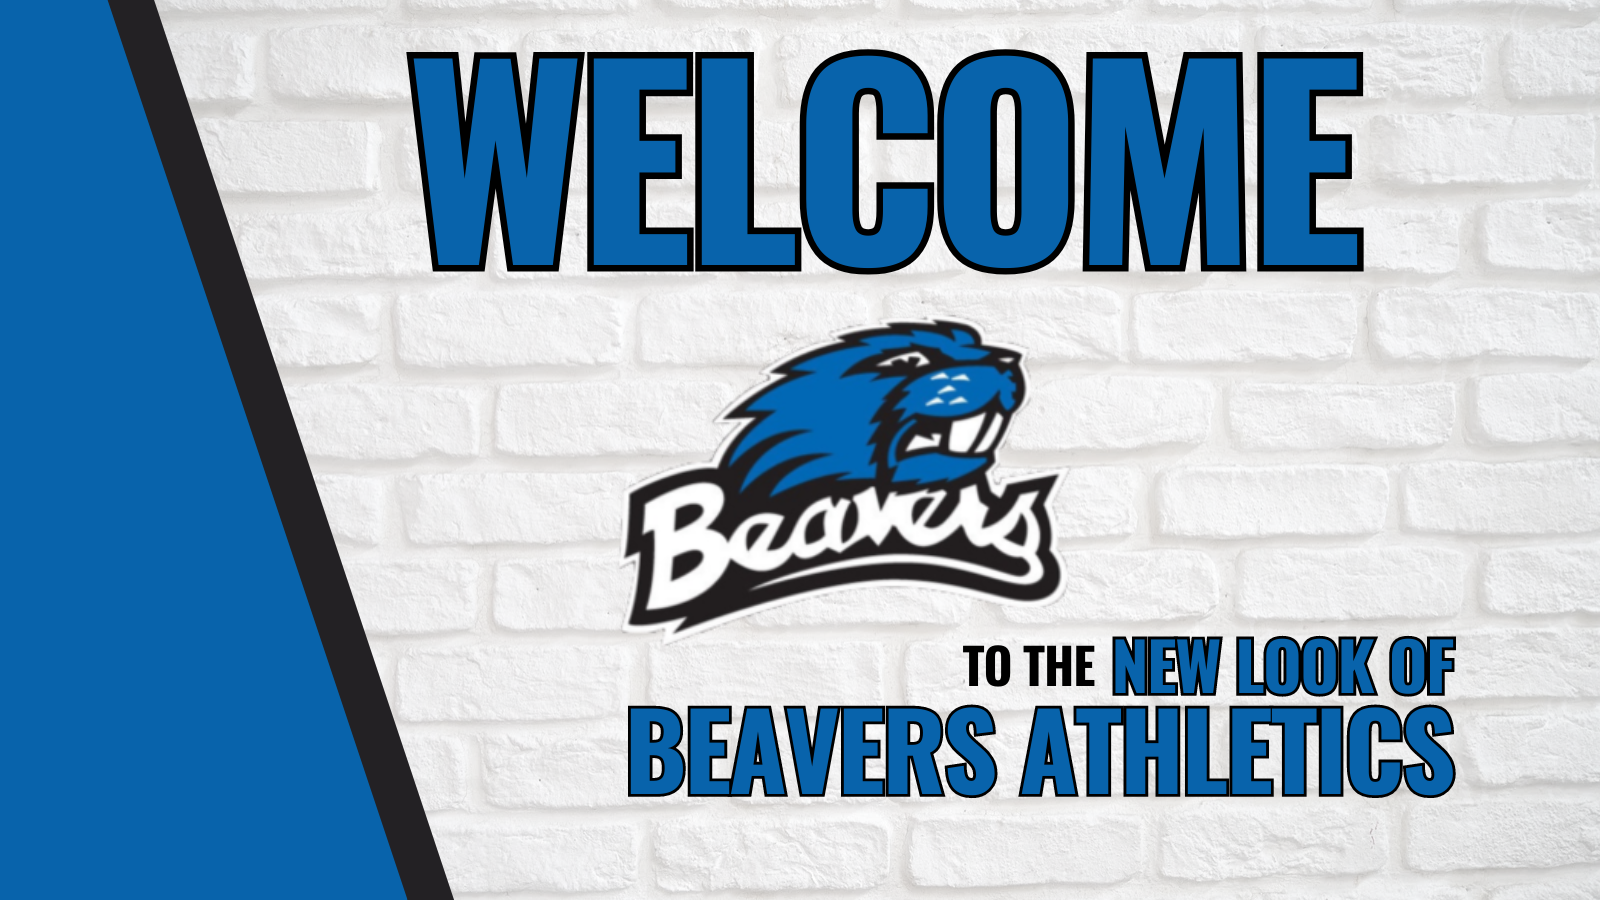 1715181292_NewLayoutAnnouncement44.png - Image for 🎉 Exciting News for Beaver Athletics Fans! 🎉